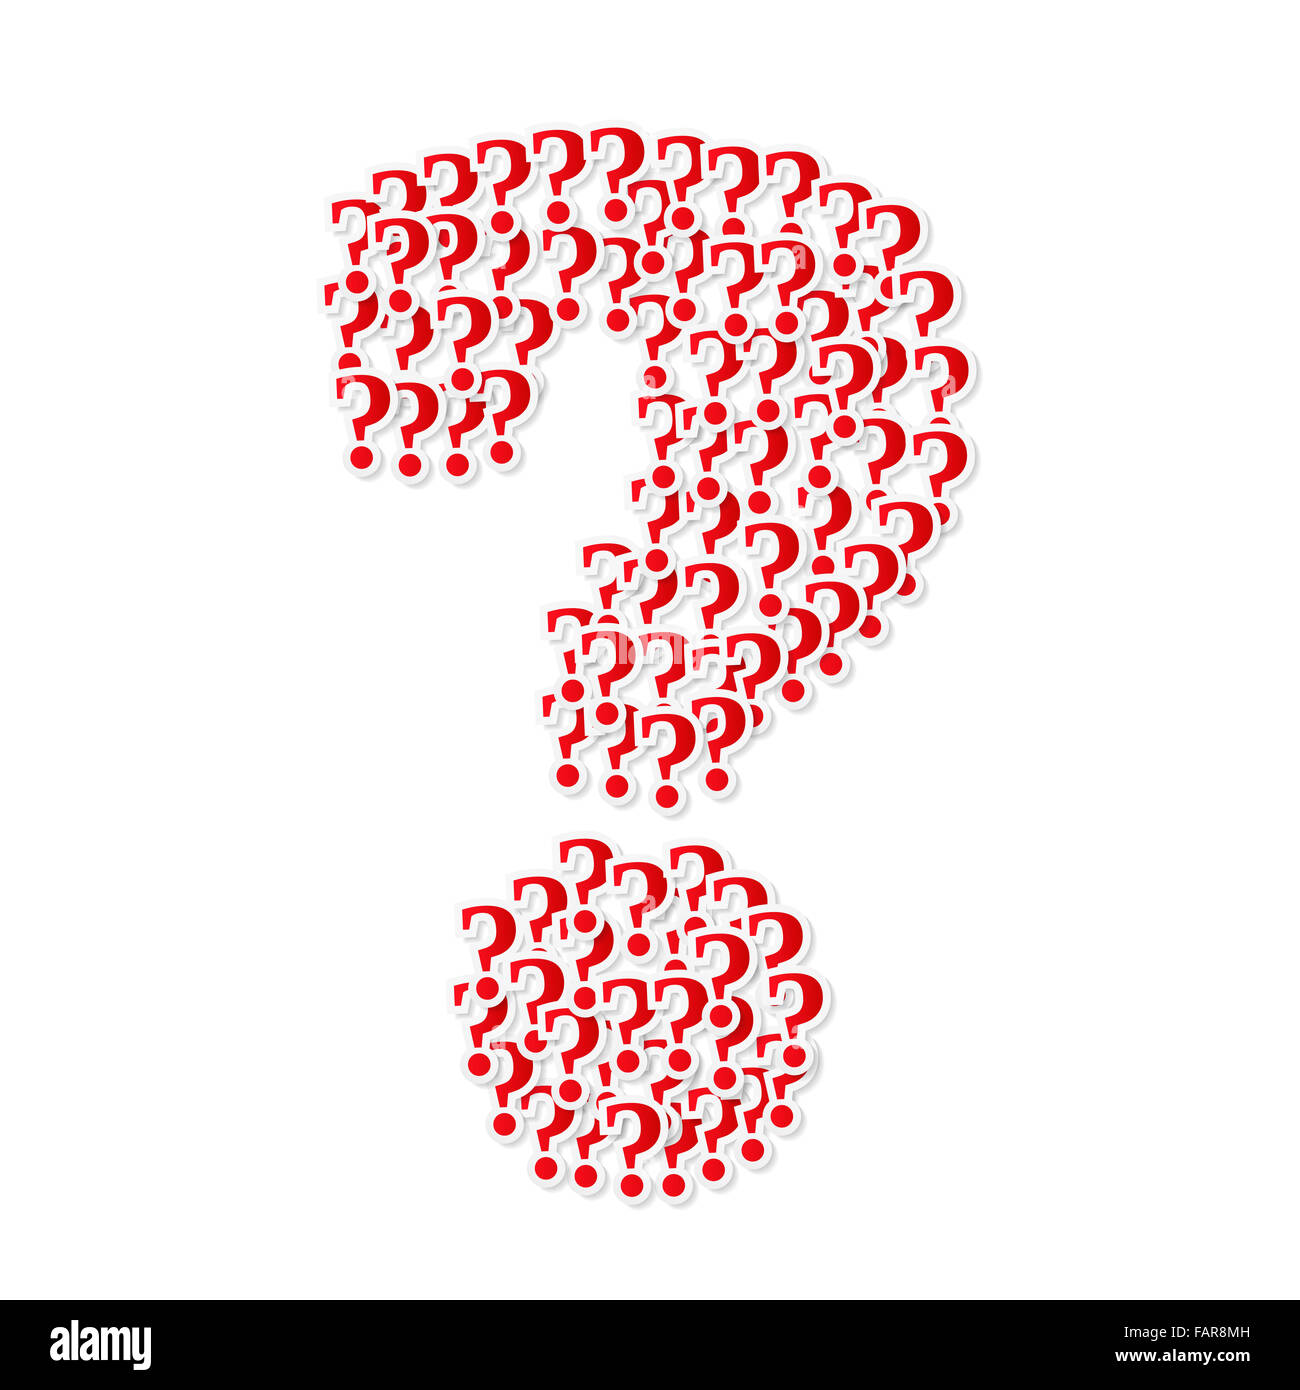 Big red question mark made of small question marks Stock Photo